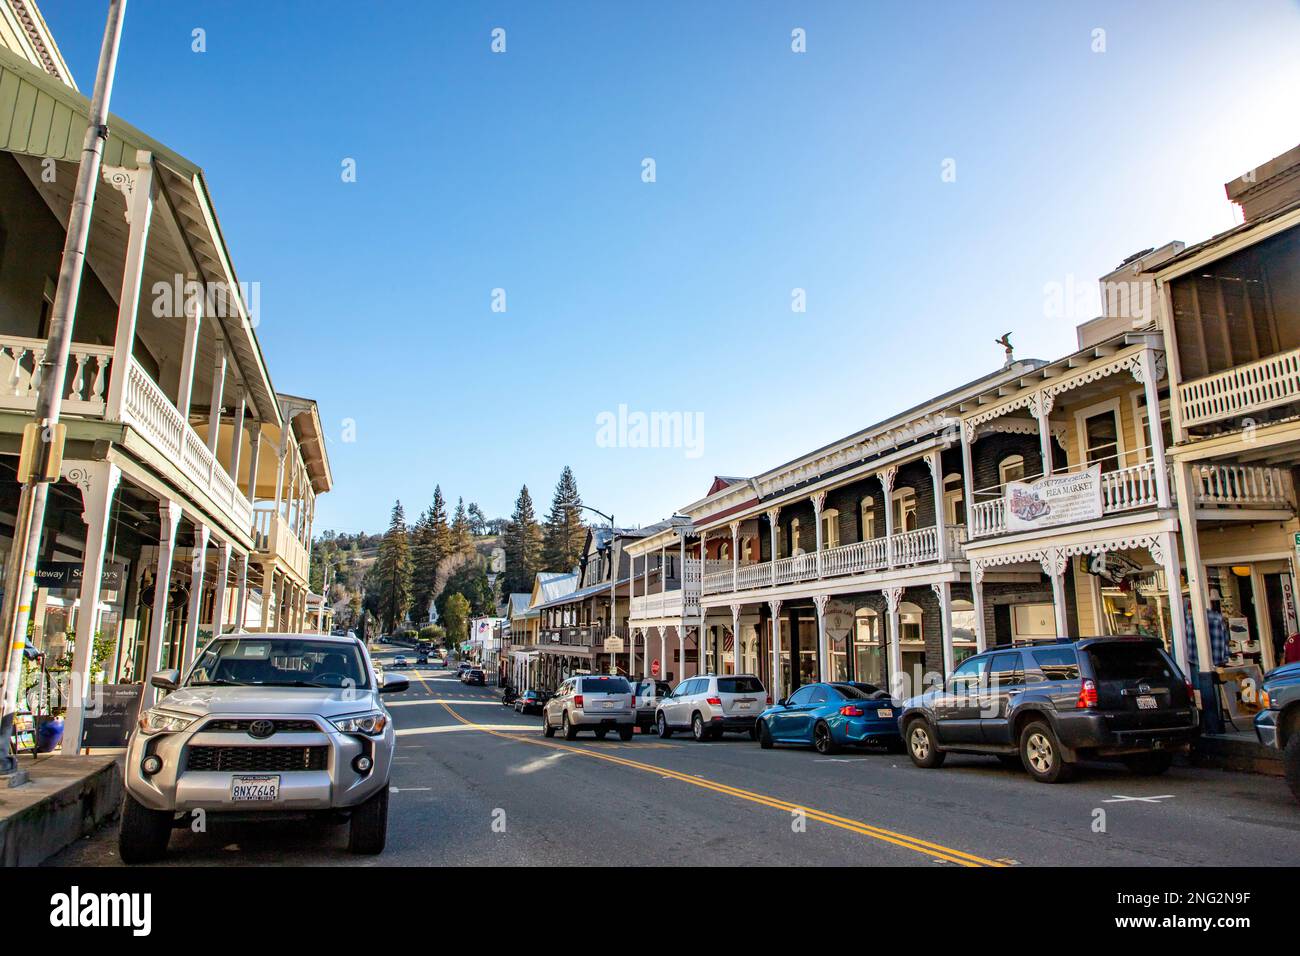 Sutter Creek is one of the gold mining towns along Highway 49 in the Sierra foothills of California. Stock Photo